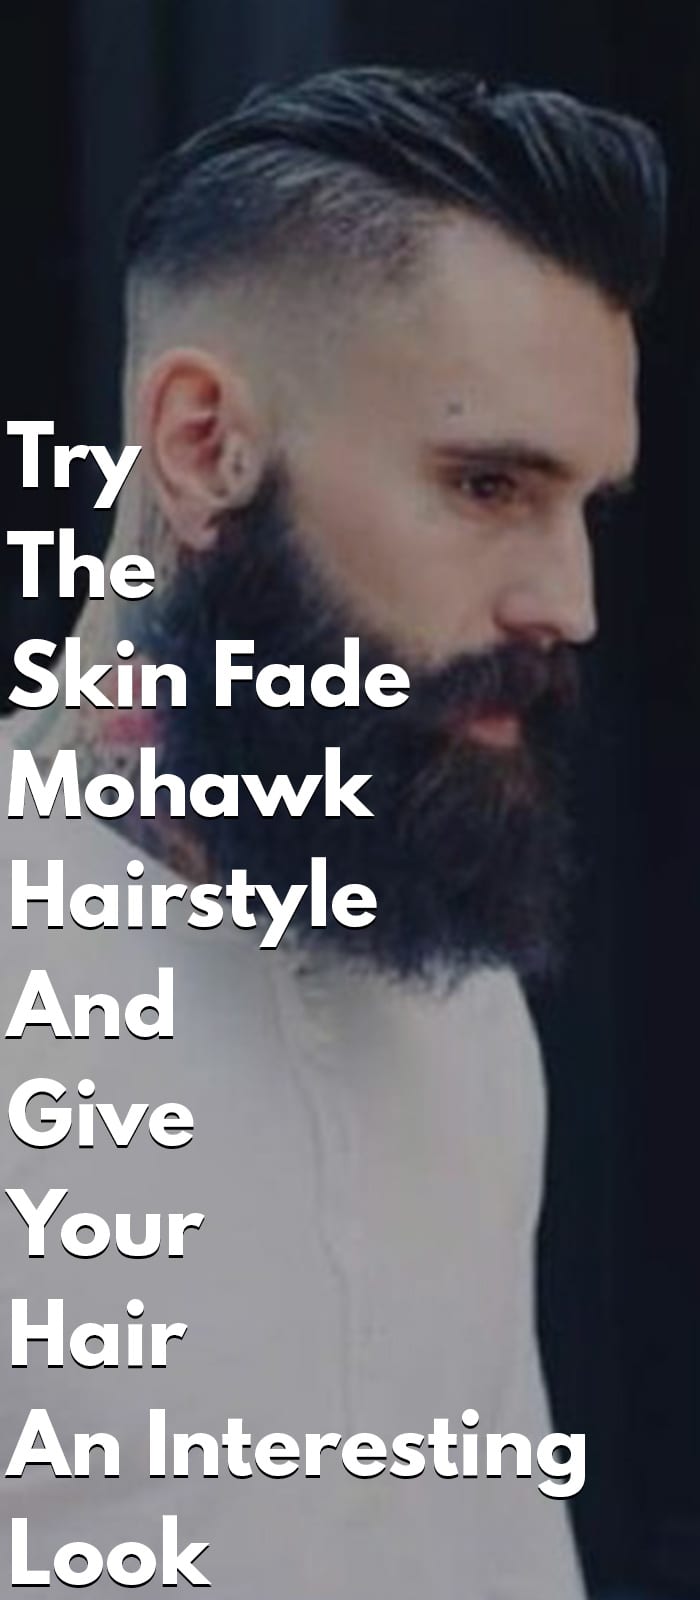 Try The Skin Fade Mohawk Hairstyle